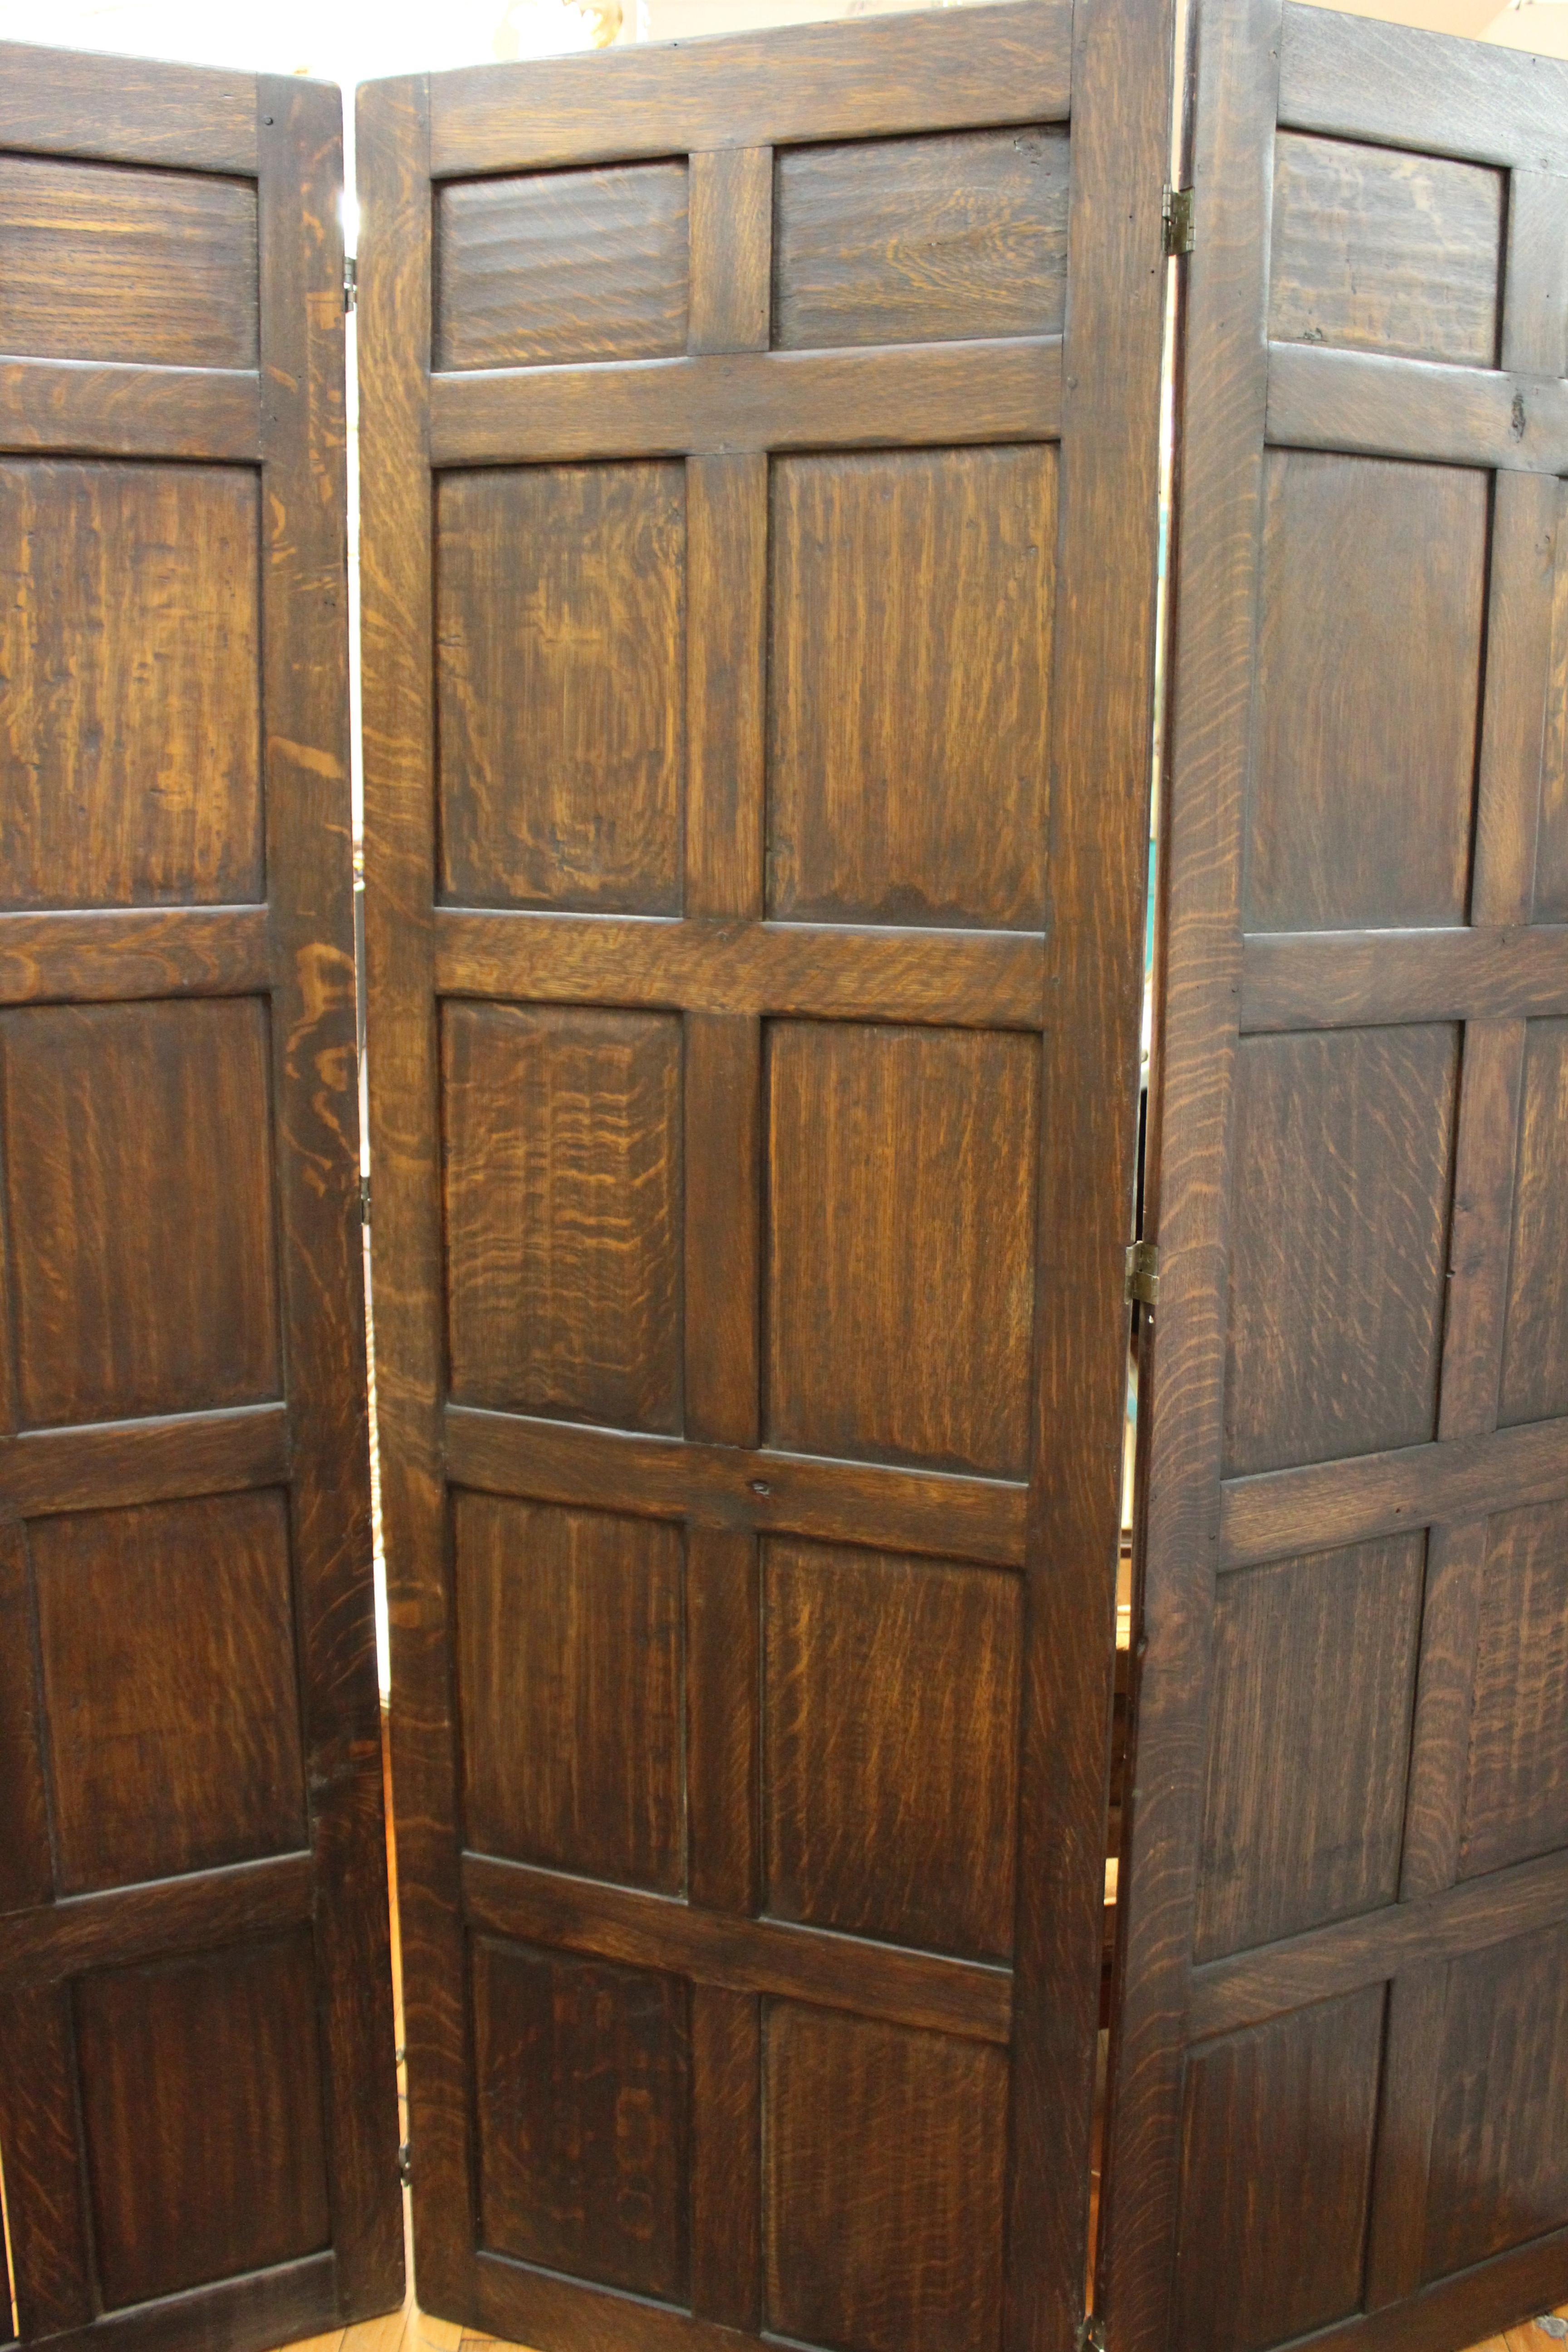 English Arts & Crafts period hand-hewn oak three-panel wooden screen with wood pegs and beveled panels. The piece was made in England during the 1870s and is in great vintage condition with age-appropriate wear to the surfaces.